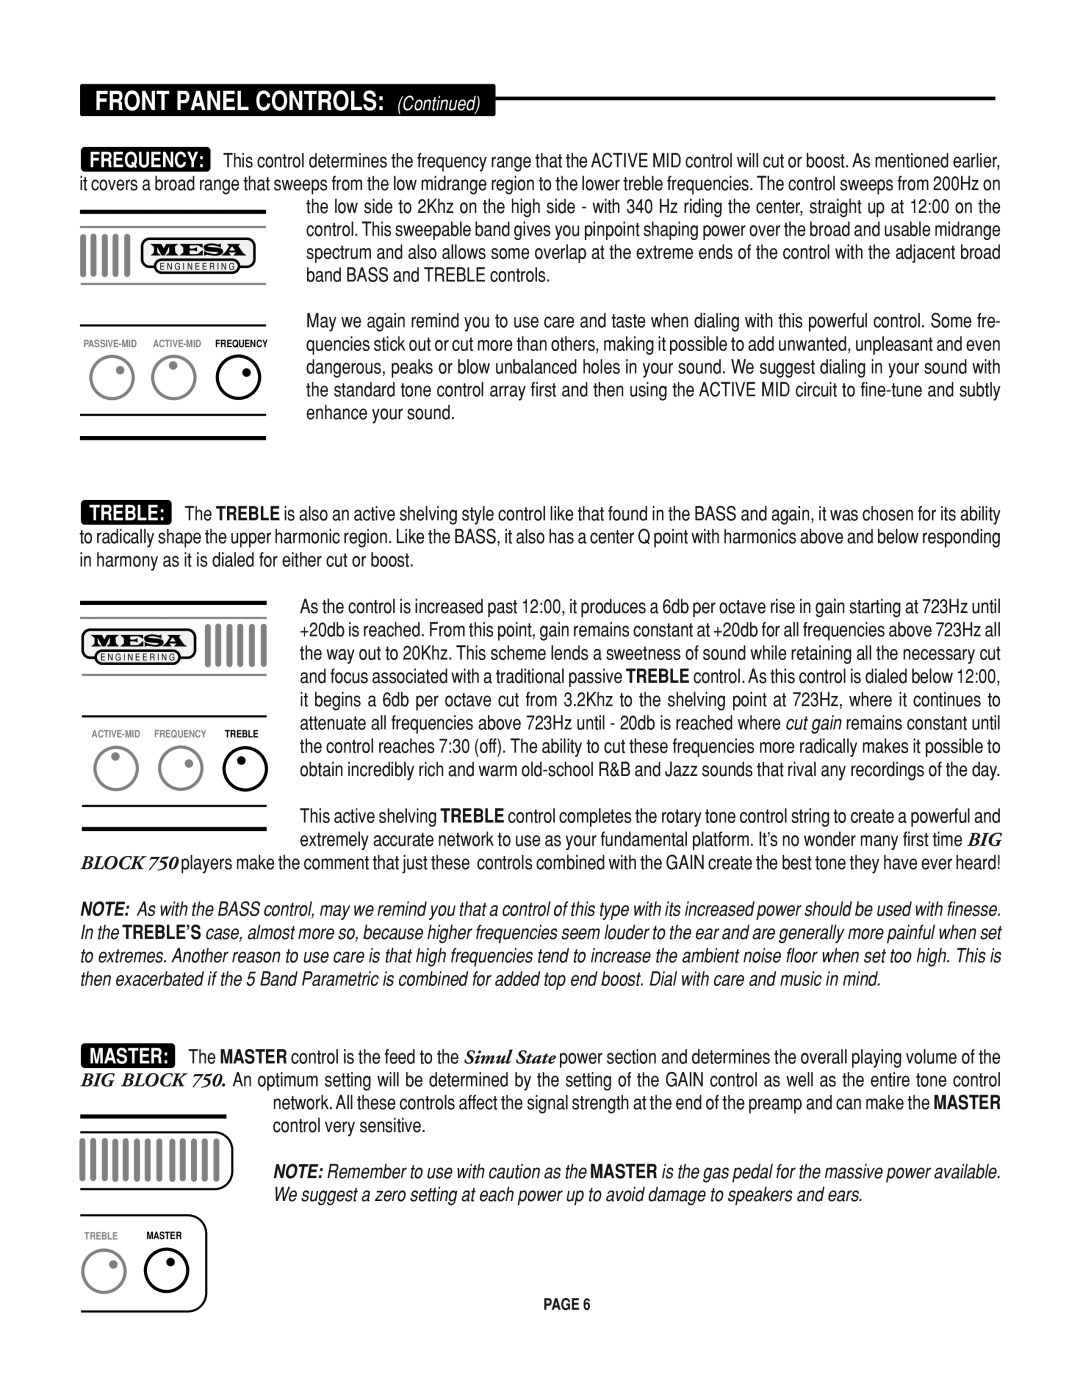 Mesa/Boogie Big Block 750 owner manual FRONT PANEL CONTROLS Continued, enhance your sound 